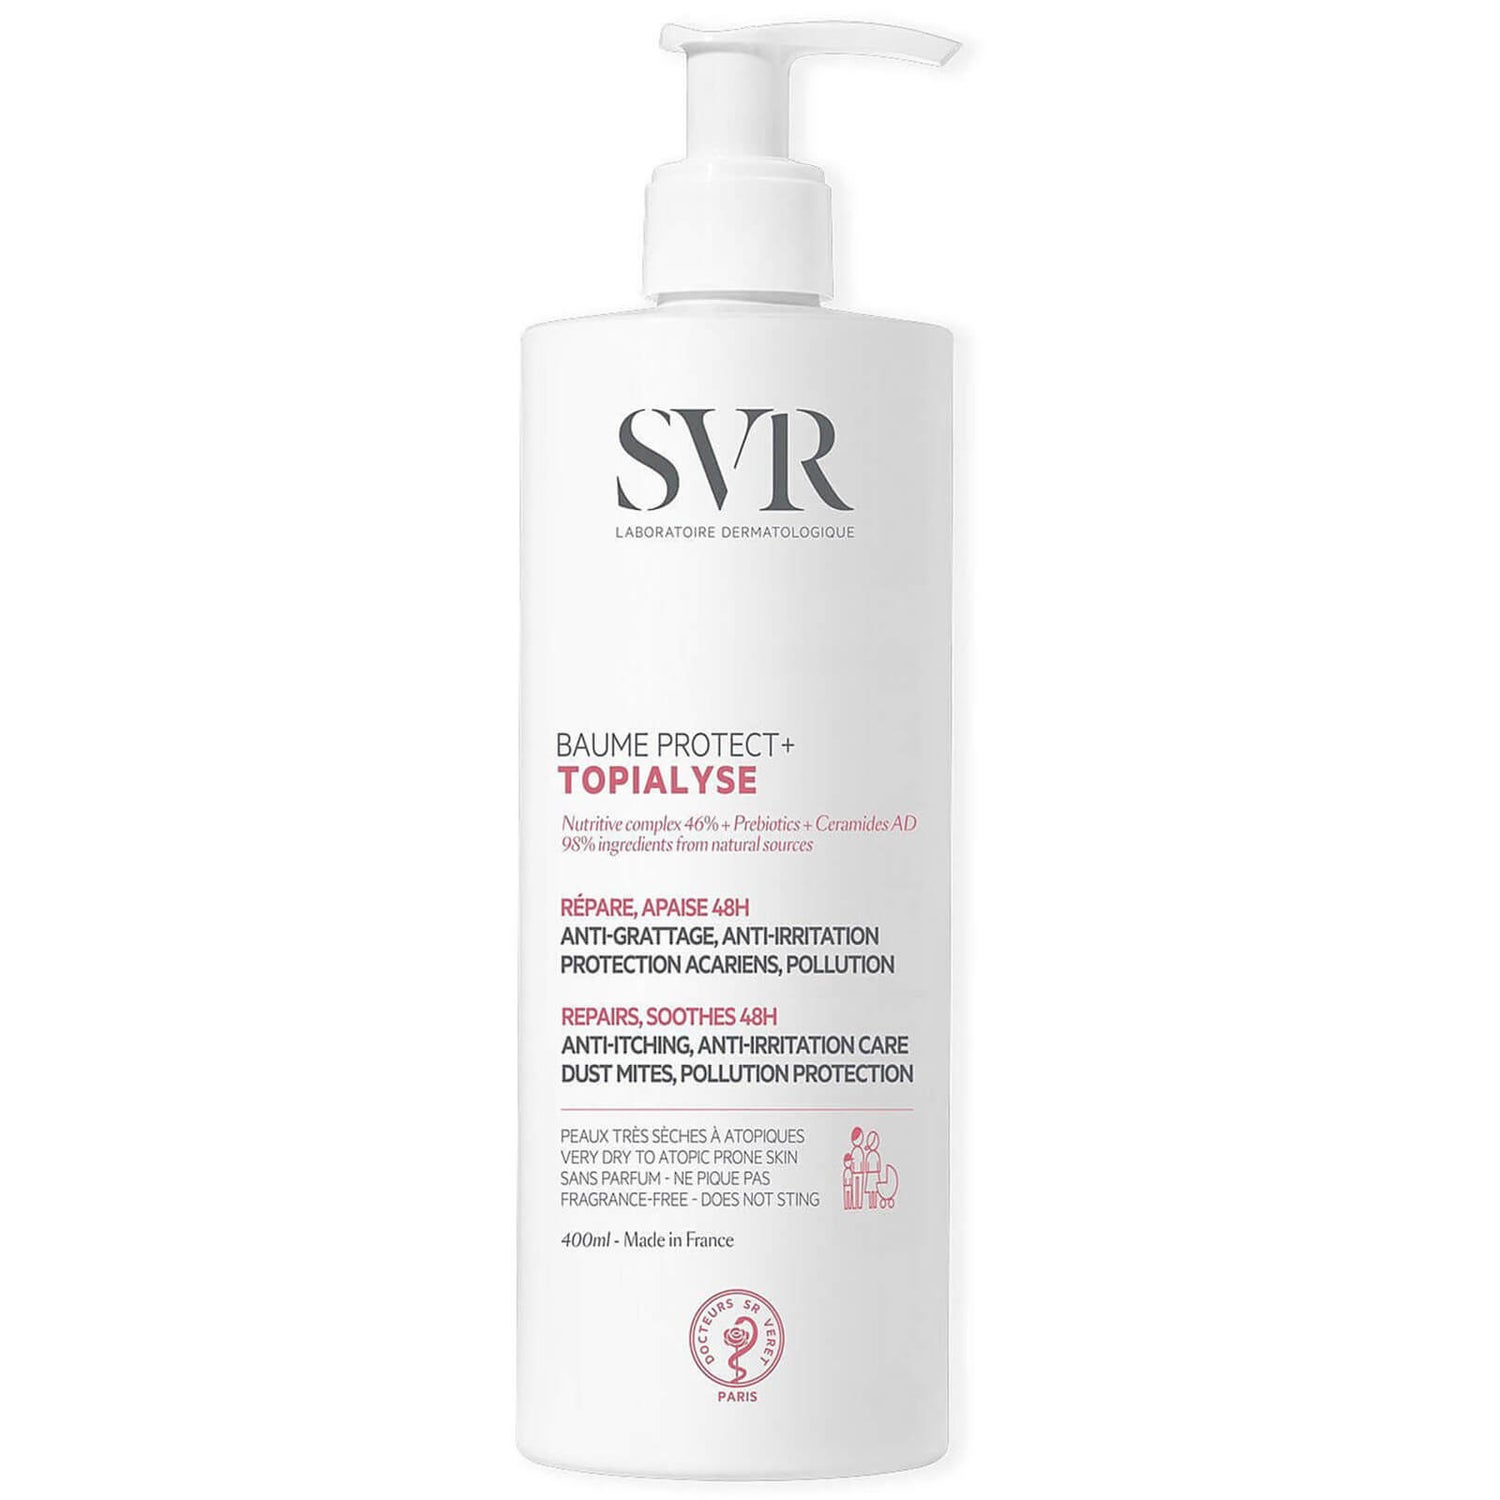 SVR Topialyse Protect+ Soothing and Moisturising Intensive Balm 400ml